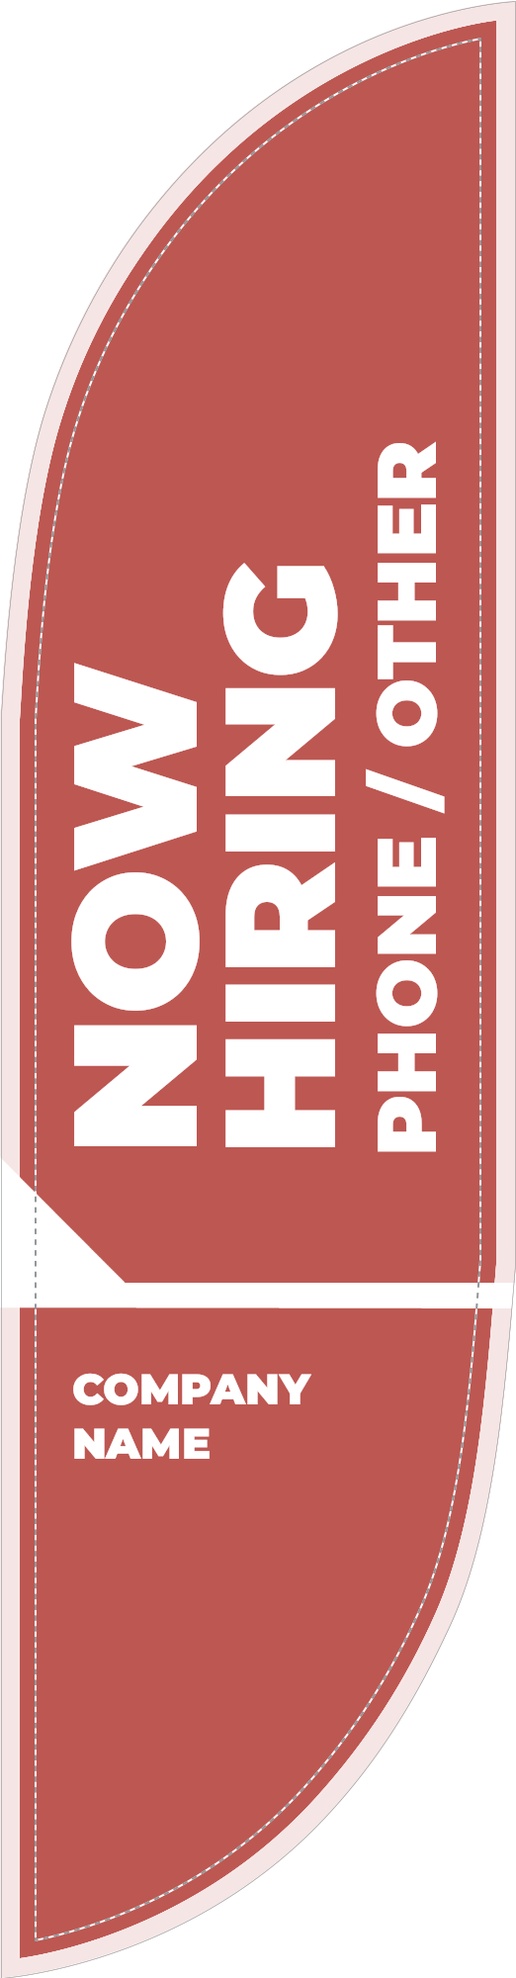 A now hiring job openings brown white design for Events